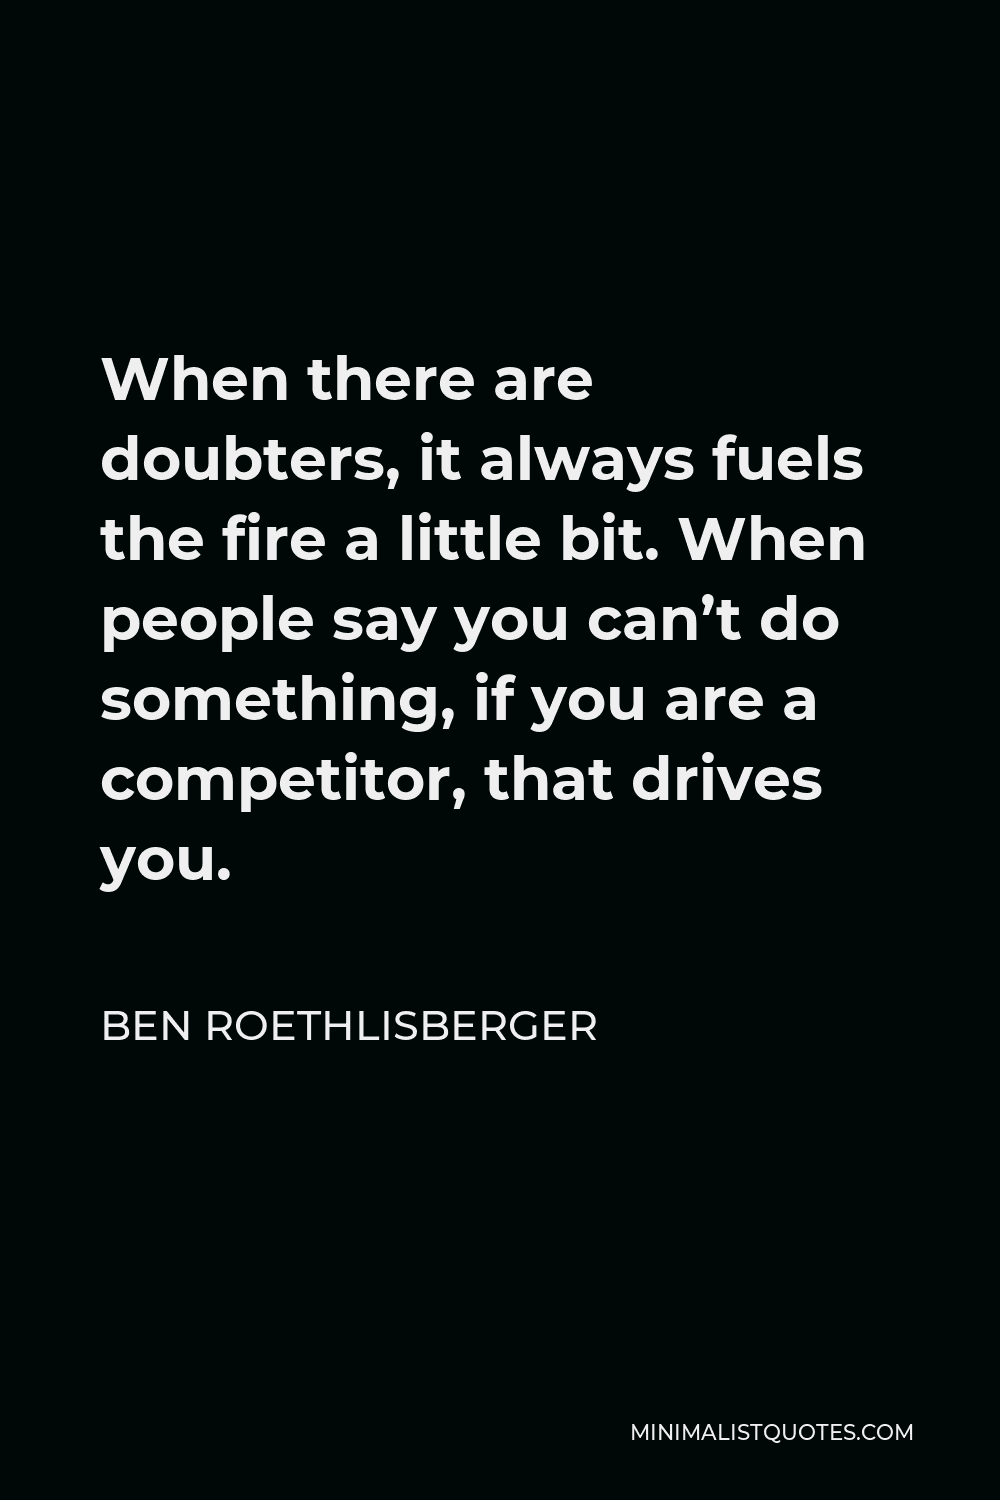 Ben Roethlisberger Quote - When there are doubters, it always fuels the fire a little bit. When people say you can’t do something, if you are a competitor, that drives you.